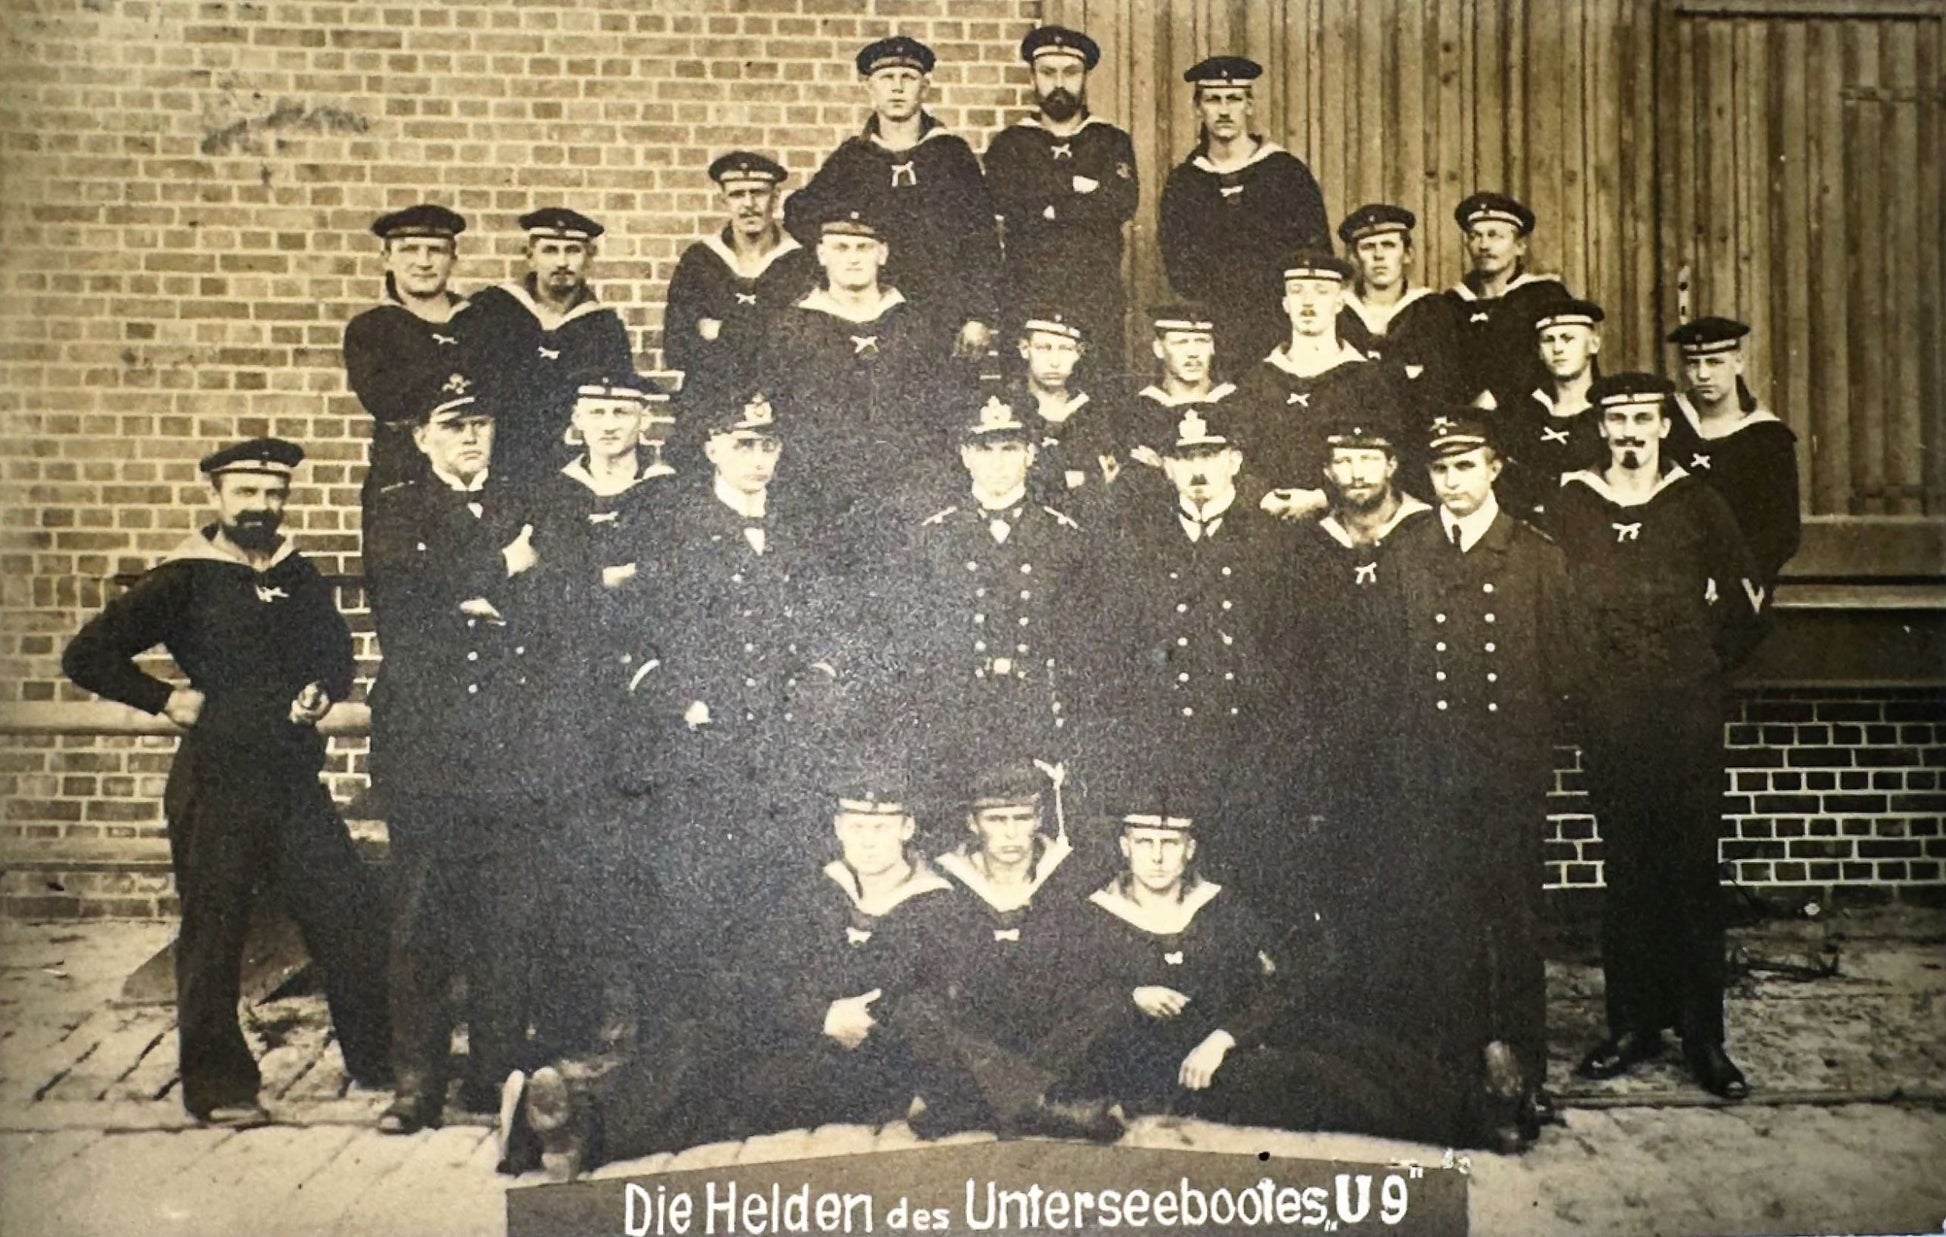 Germany Navy Post Card of Otto Weddigen and the Crew of the U-9 - Derrittmeister Militaria Group